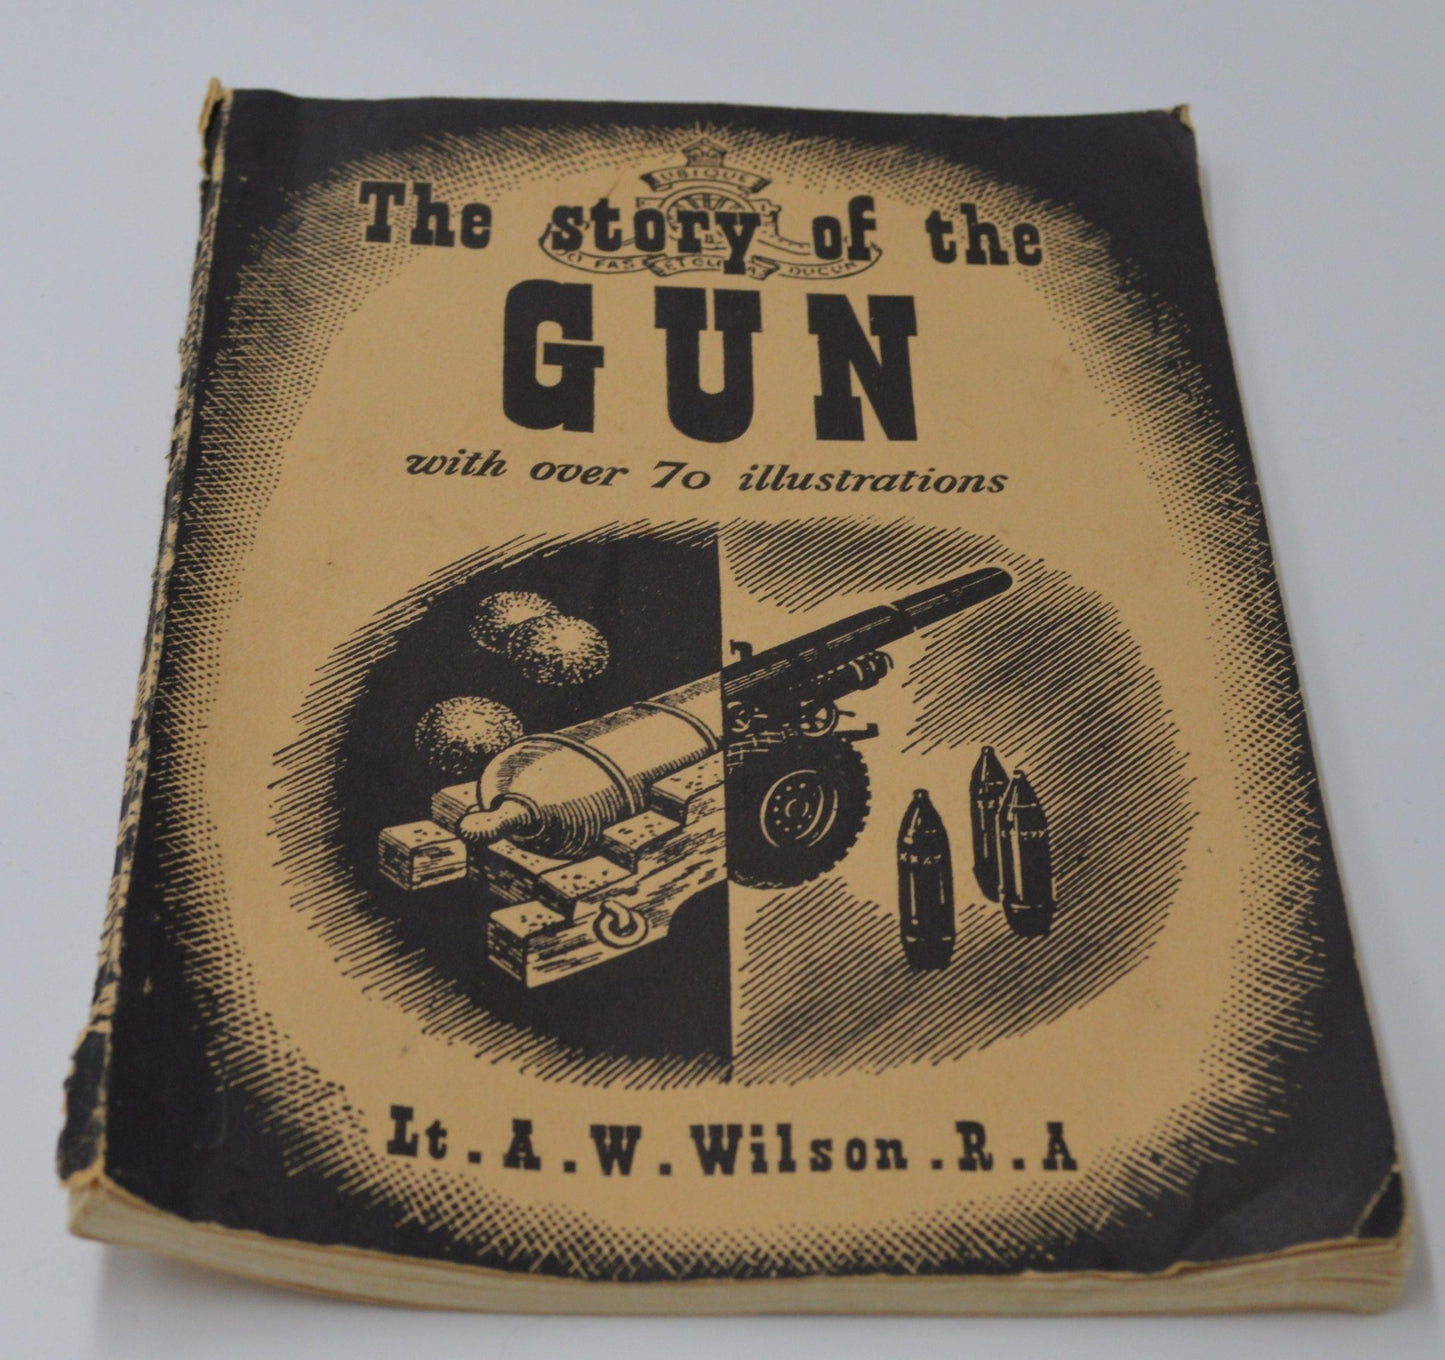 SECONDHAND BOOK THE STORY OF THE GUN by LT.A.W.WILSON.R.A - TMD167207